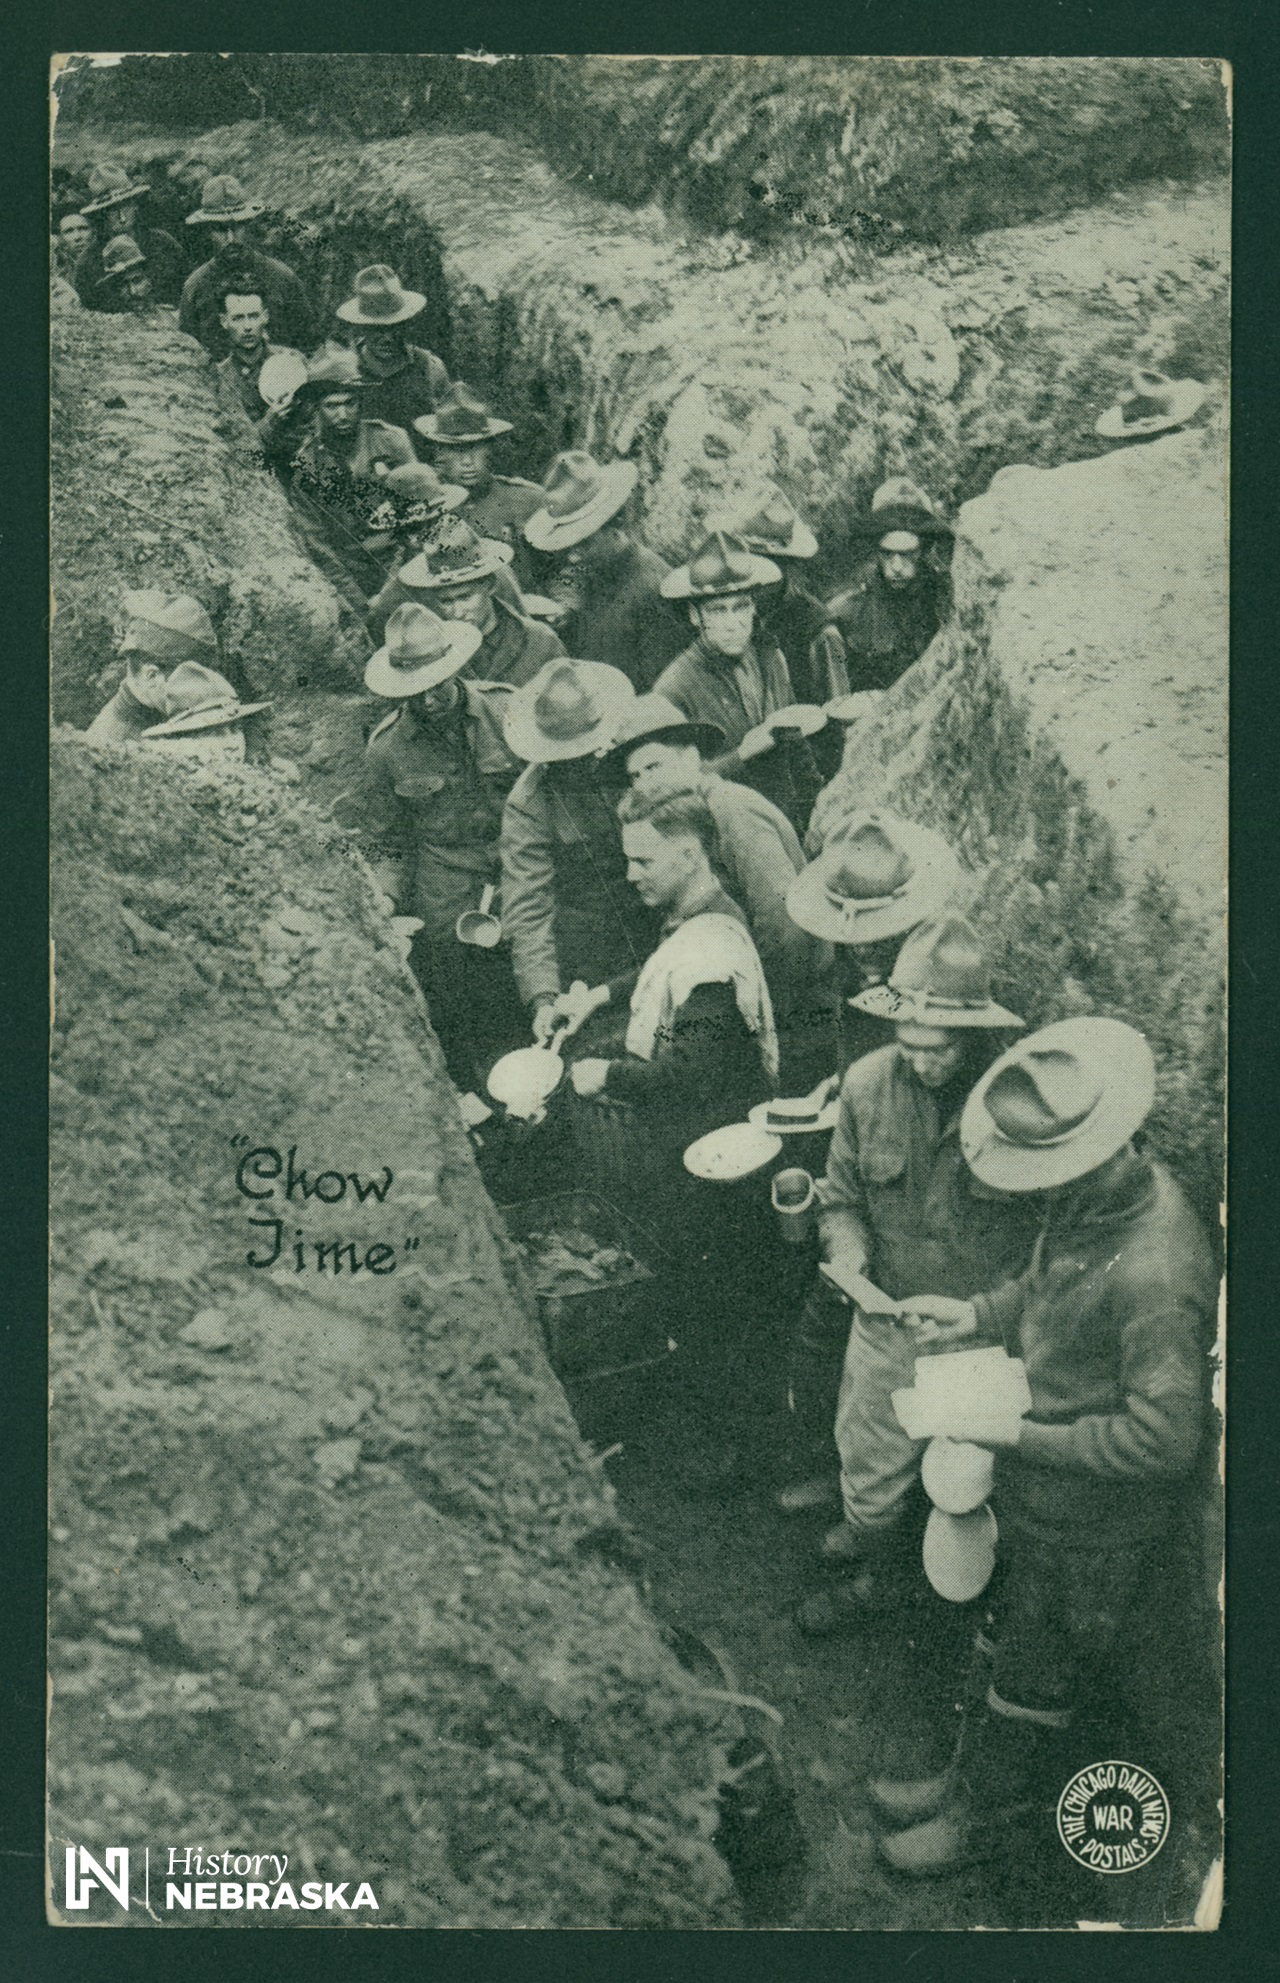 Chow time for World War I soldiers in a trench.